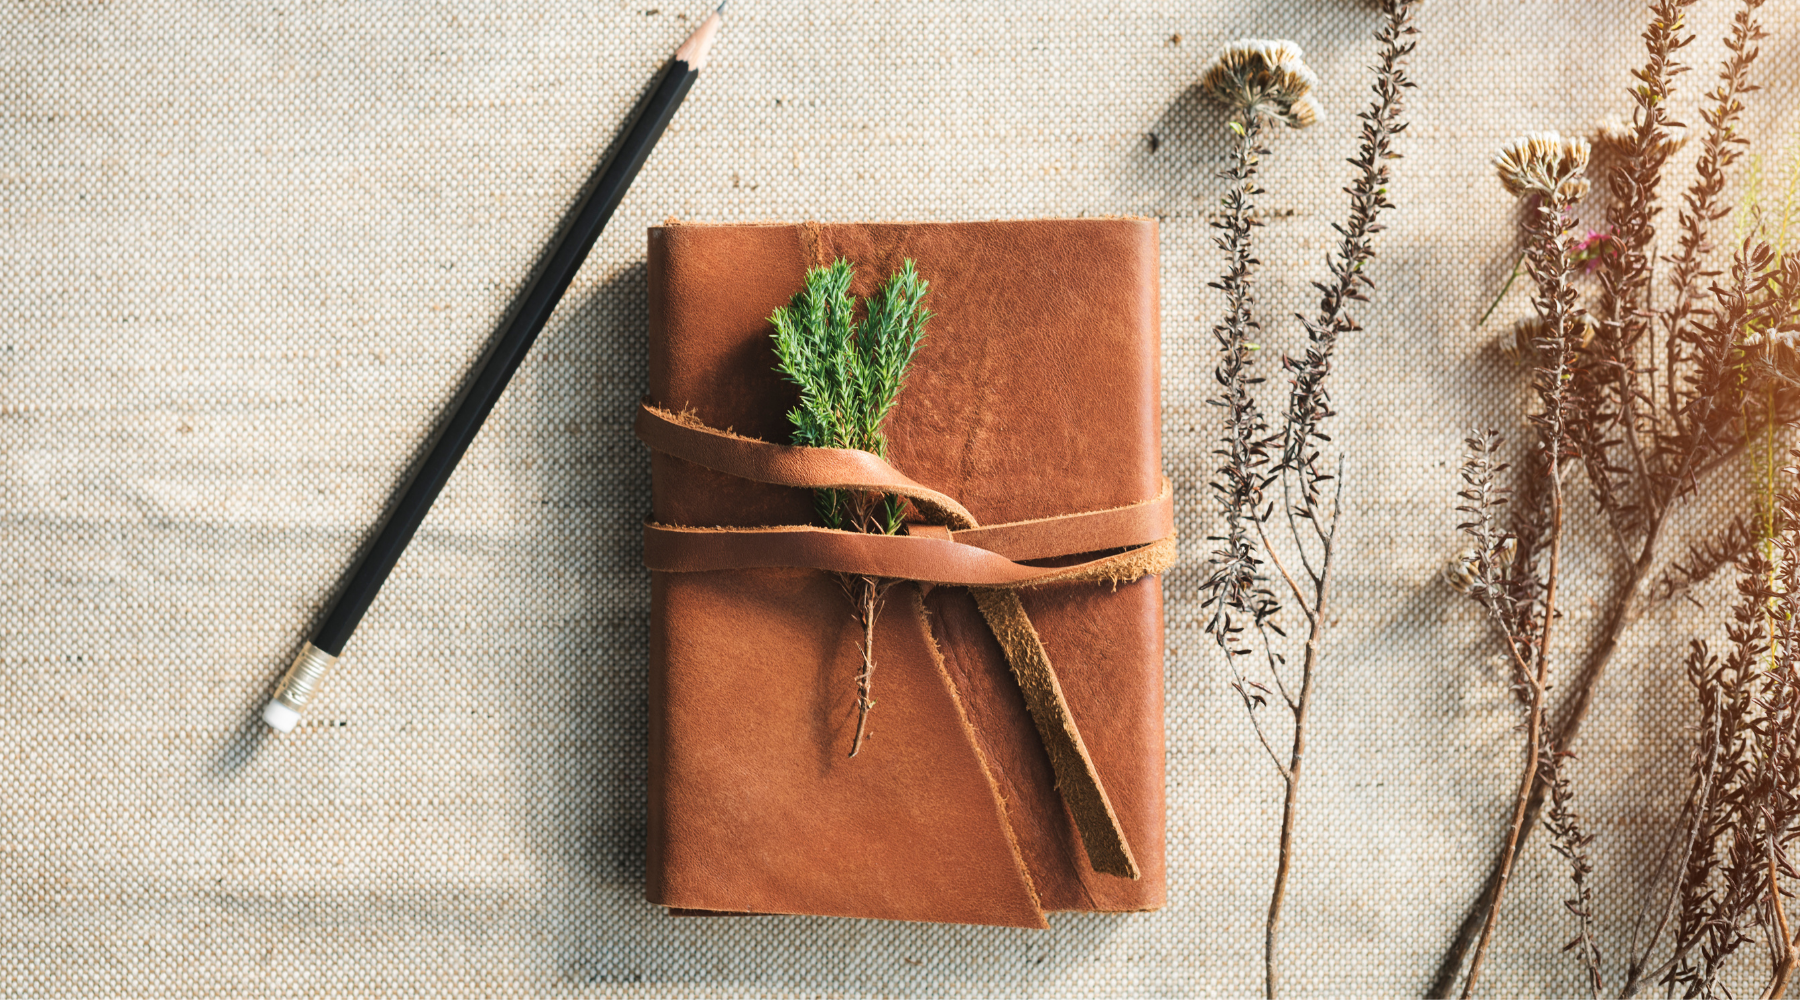 diary, journal, book, herbs, dry flowers, pencil, journal on a table